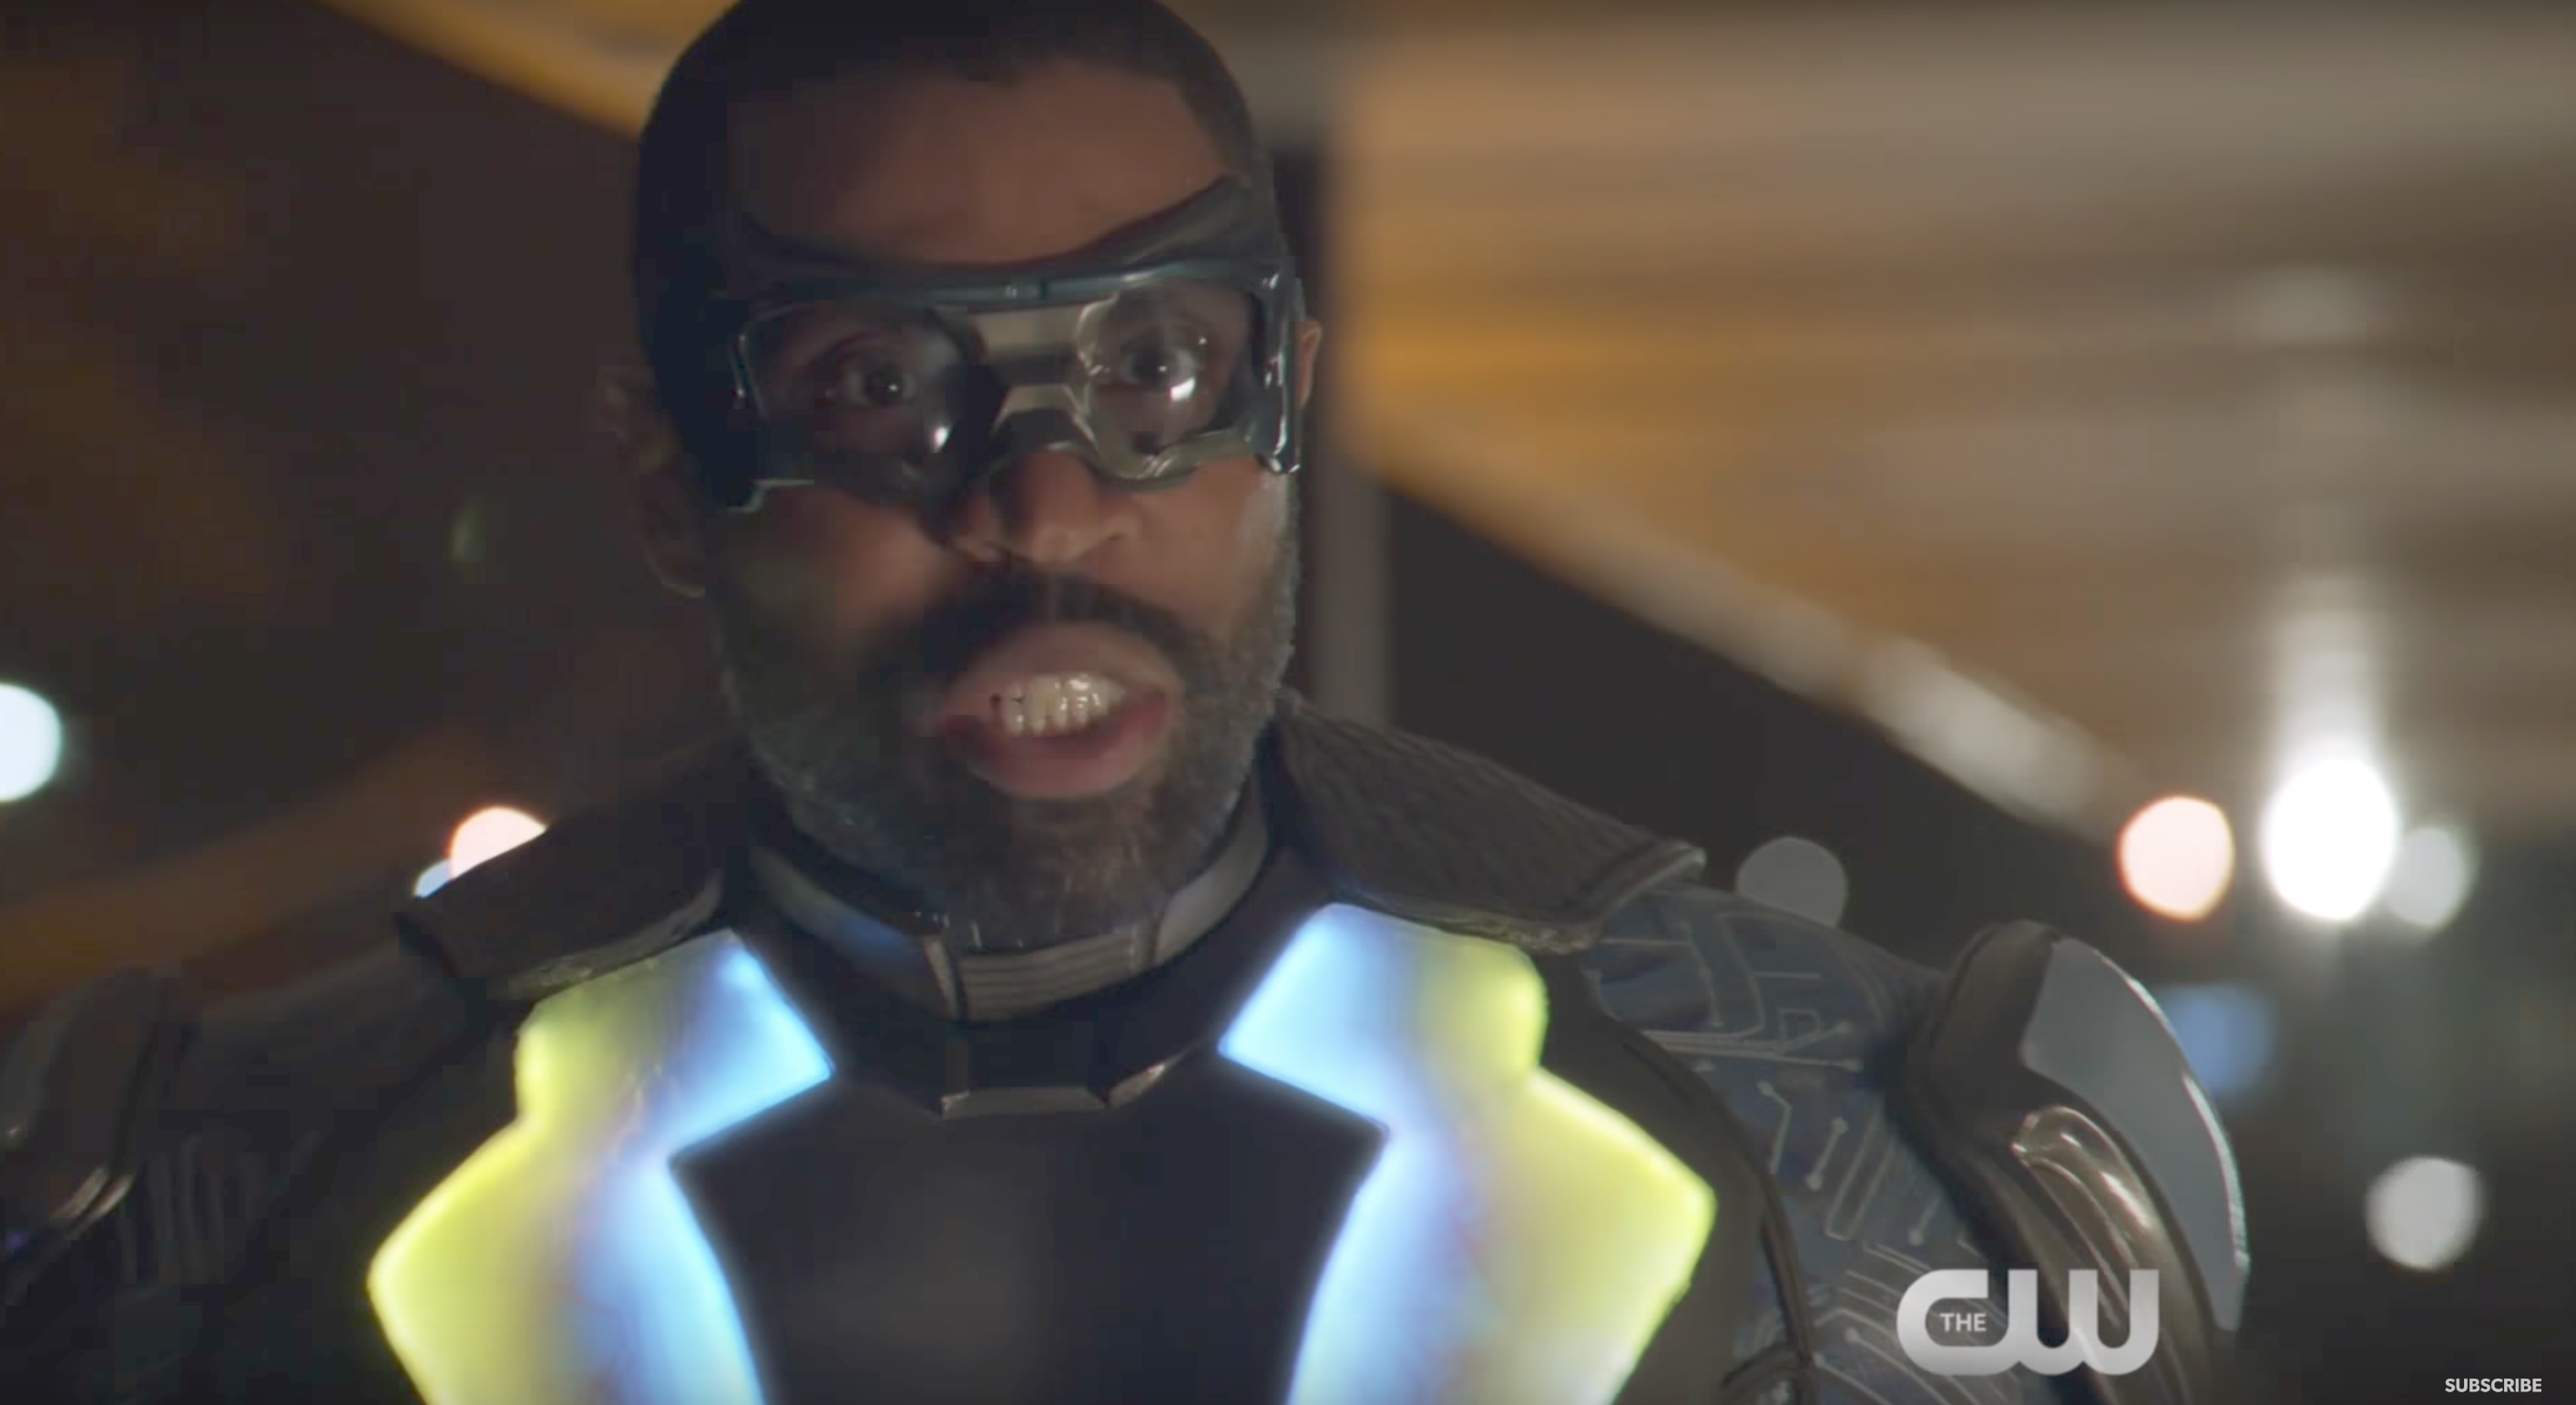 Black Lightning viewer reactions round-up